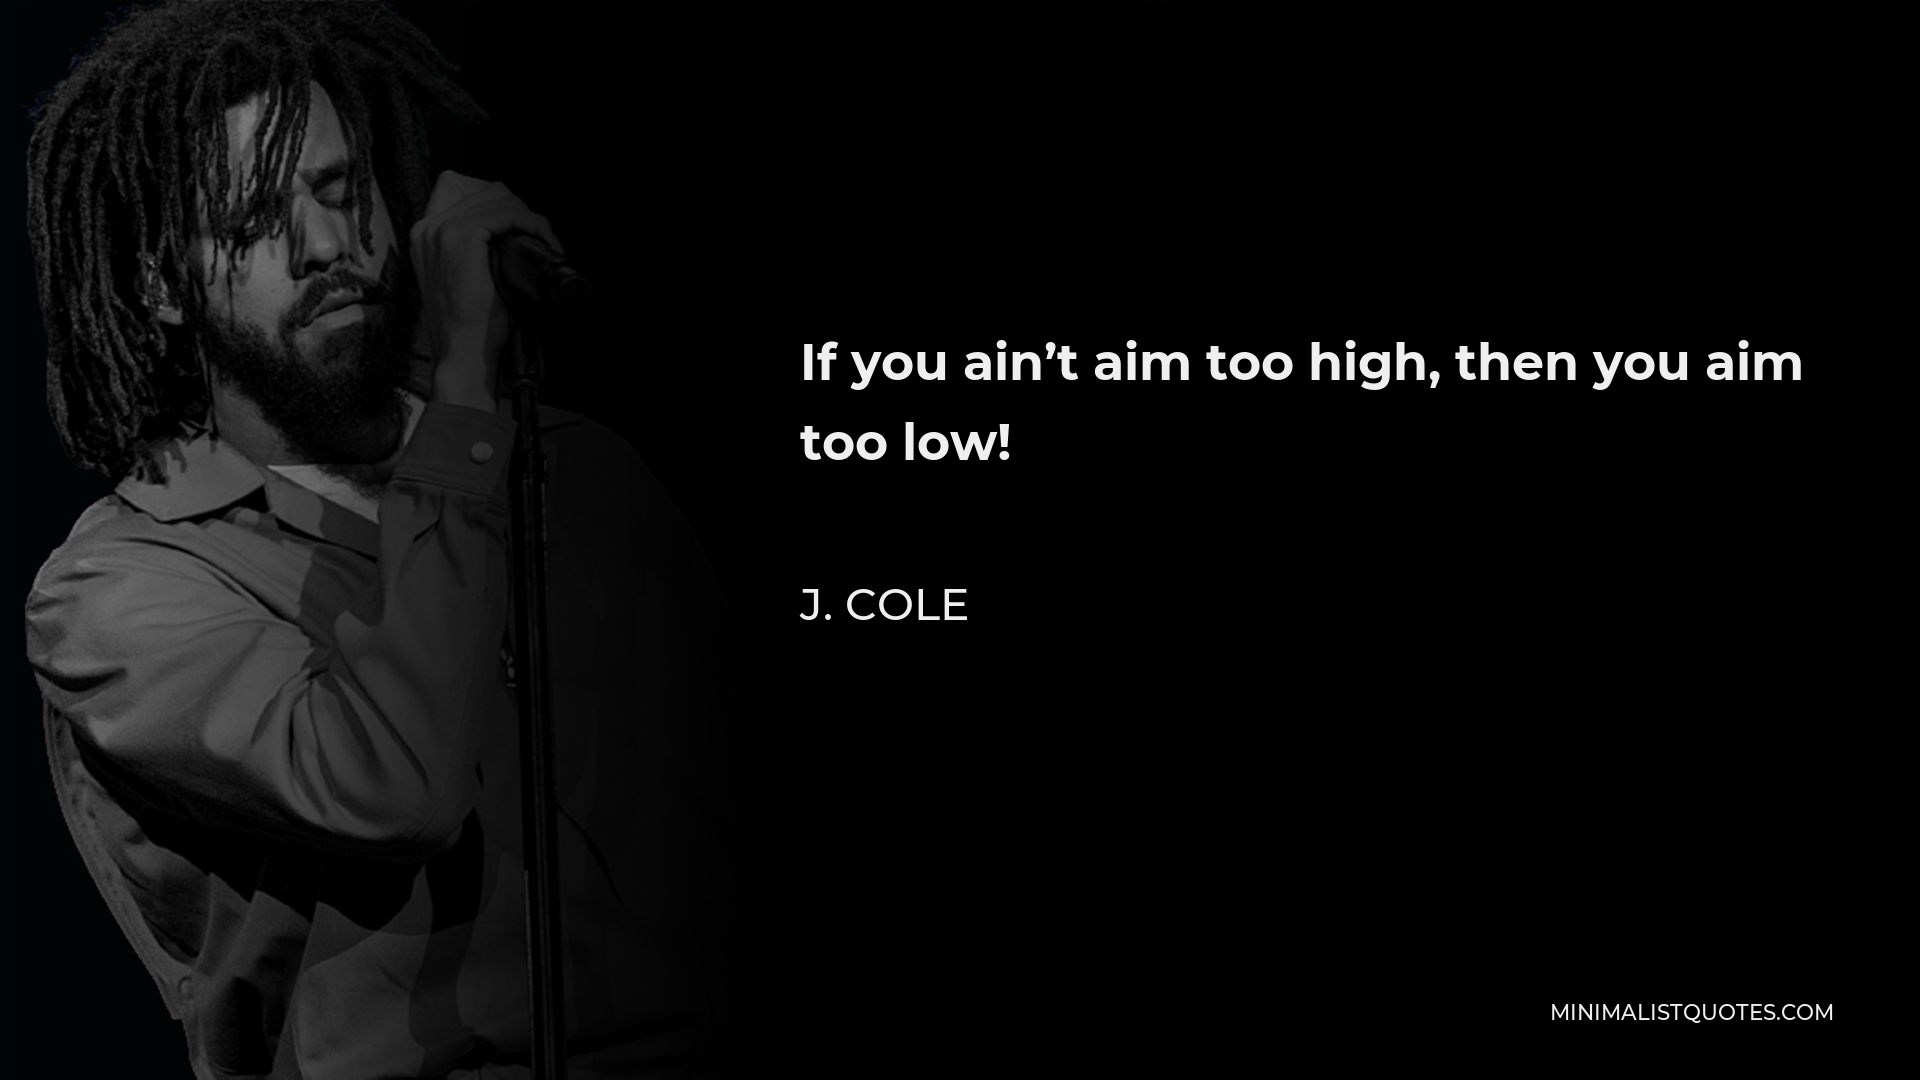 J. Cole Quote - If you ain’t aim too high, then you aim too low!